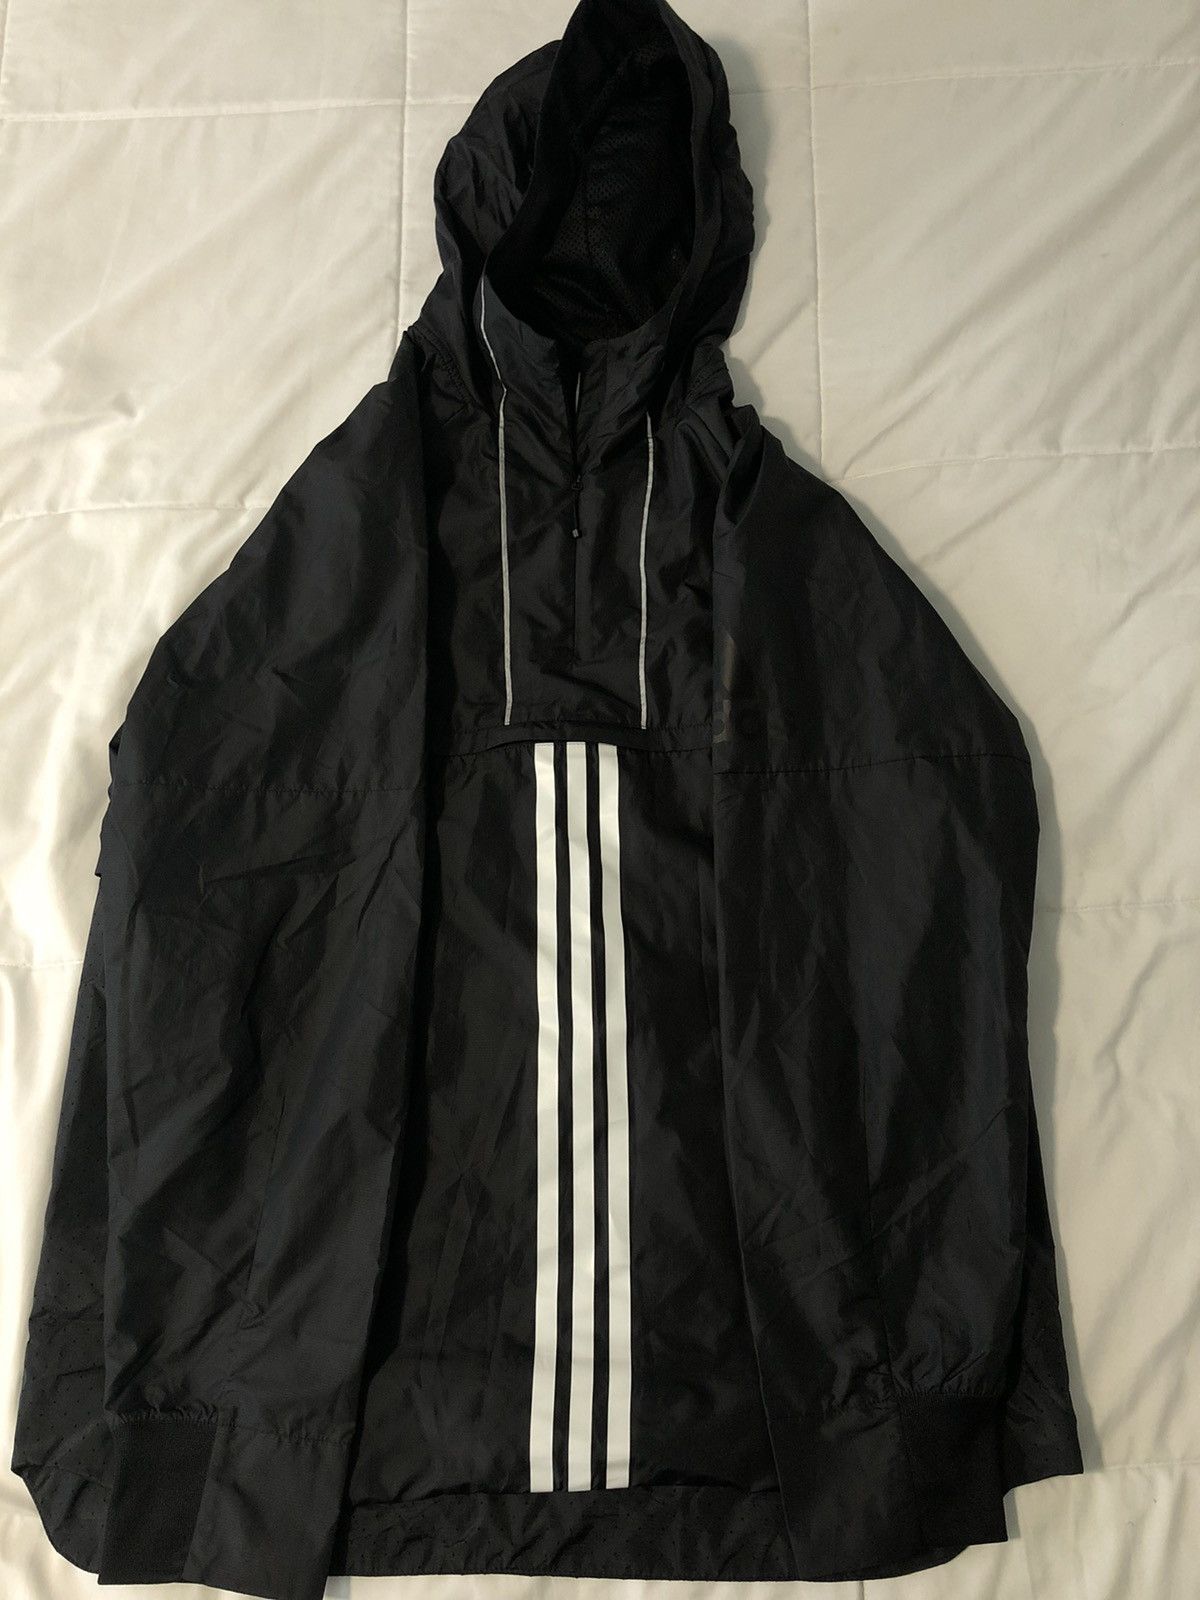 Adidas Adidas woven shell jacket Size US L / EU 52-54 / 3 - 2 Preview